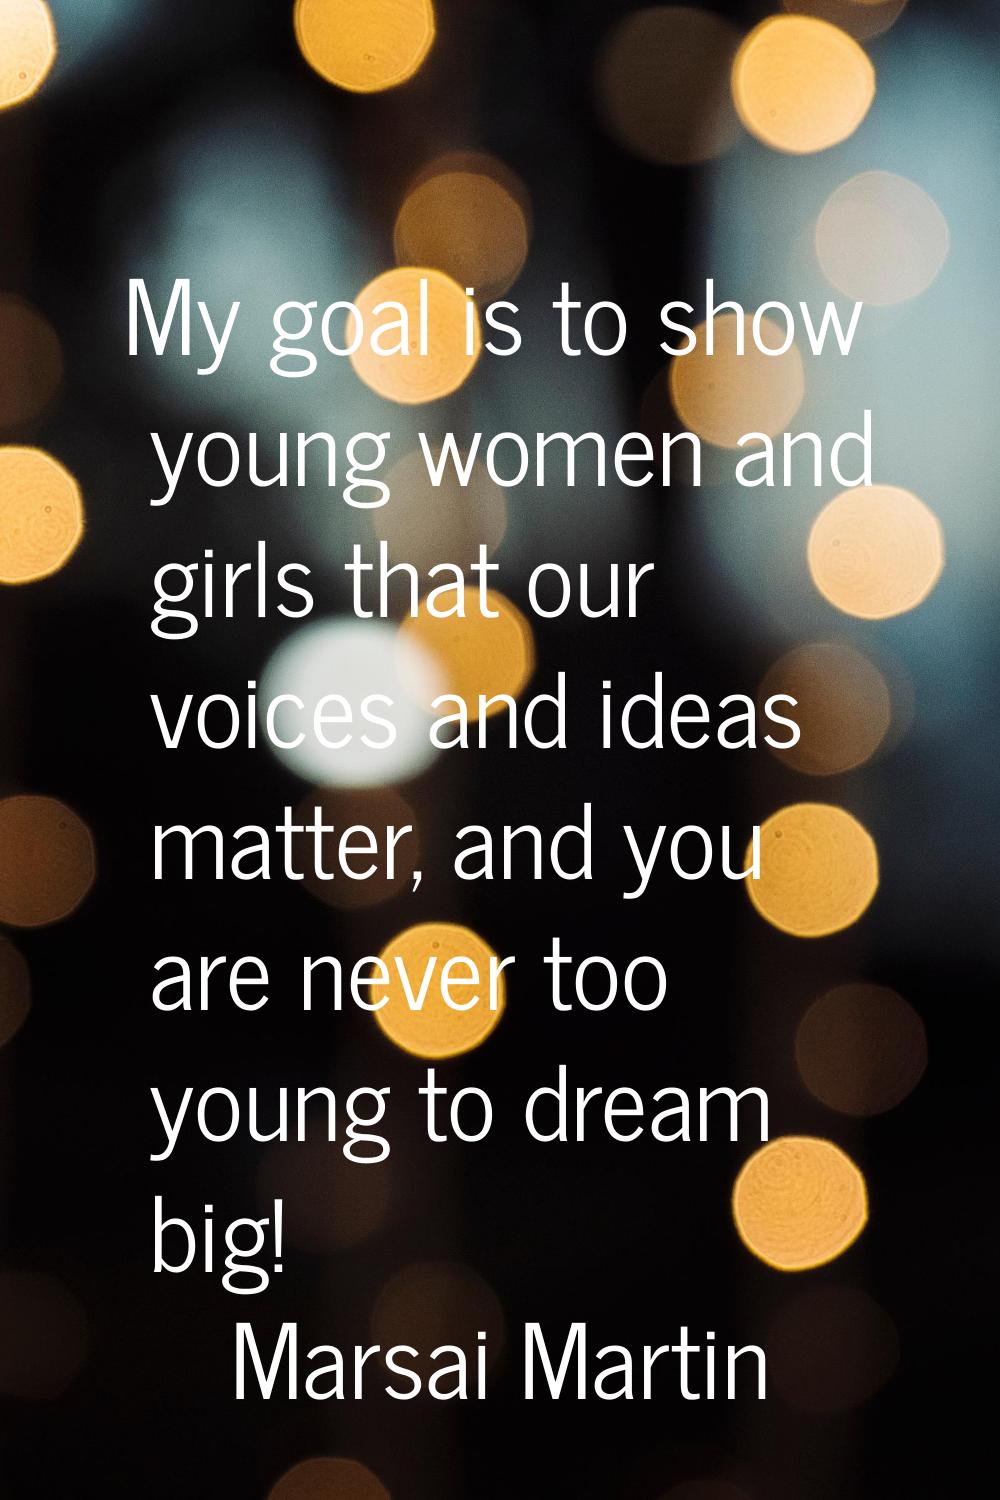 My goal is to show young women and girls that our voices and ideas matter, and you are never too yo